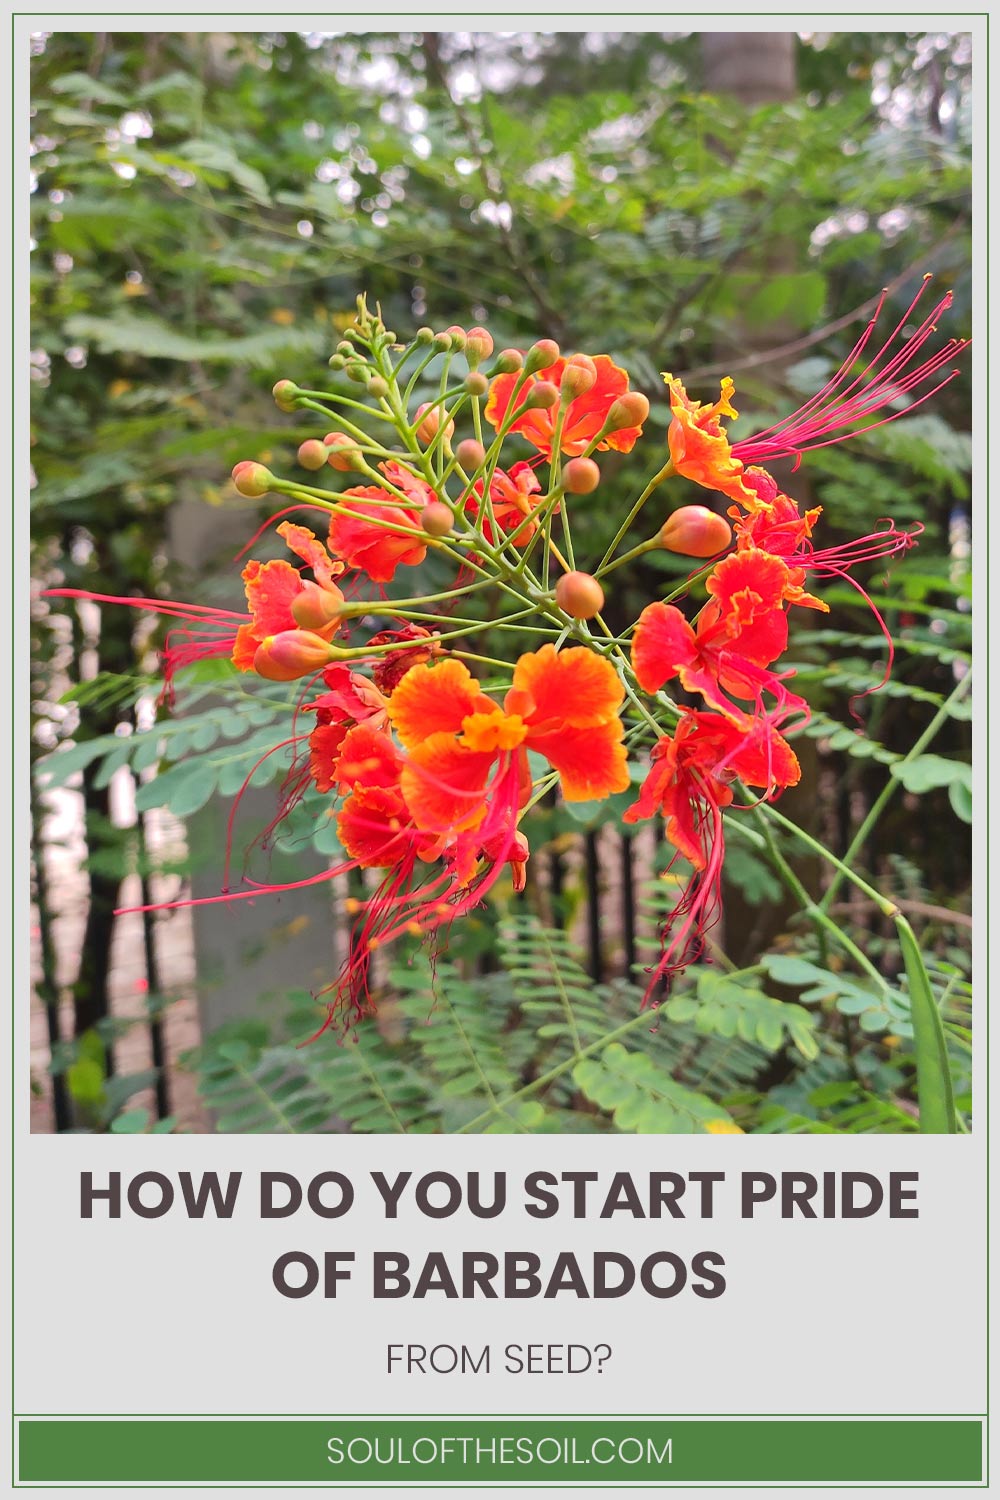 Barbados on tree - How Do You Start Pride of it From Seed?